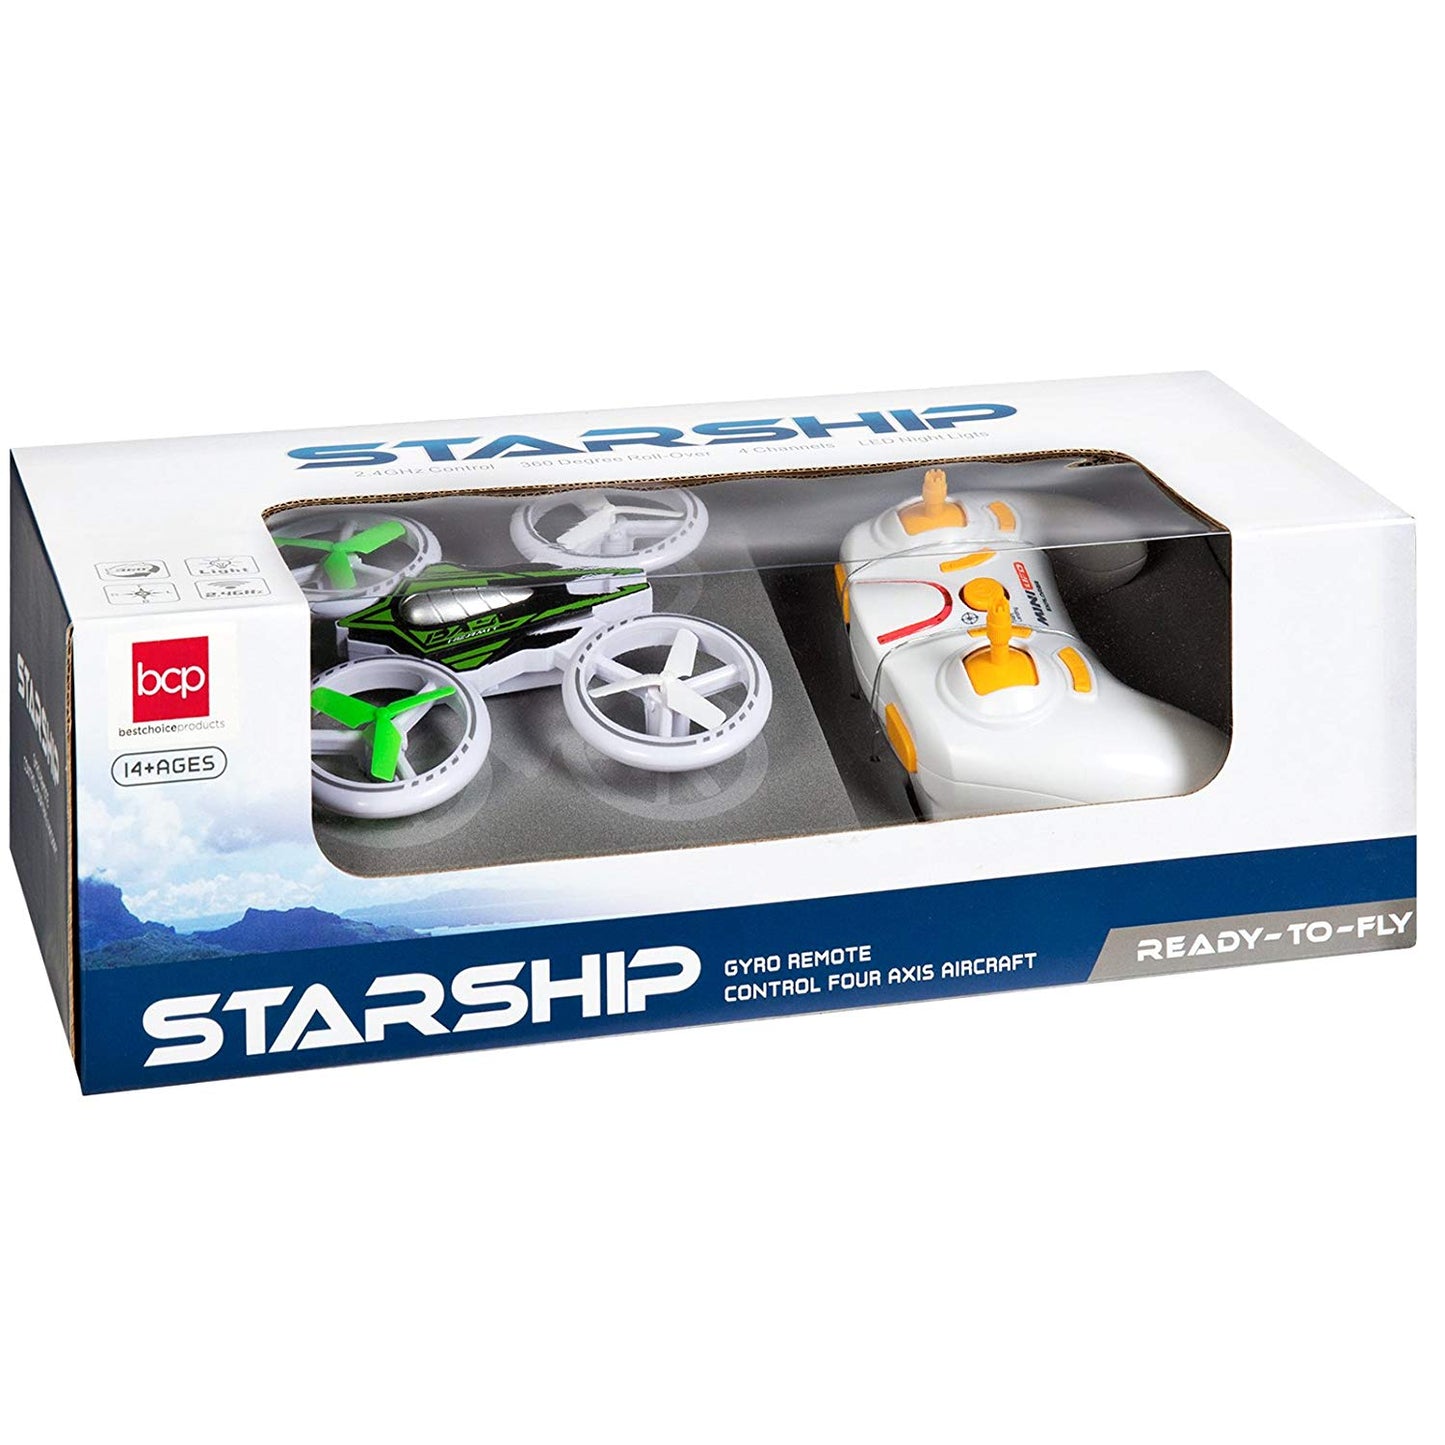 2.4GHz Remote Control Light-Up LED RC Drone Quadcopter UFO Star Ship w/ Altitude Hold -Multicolor